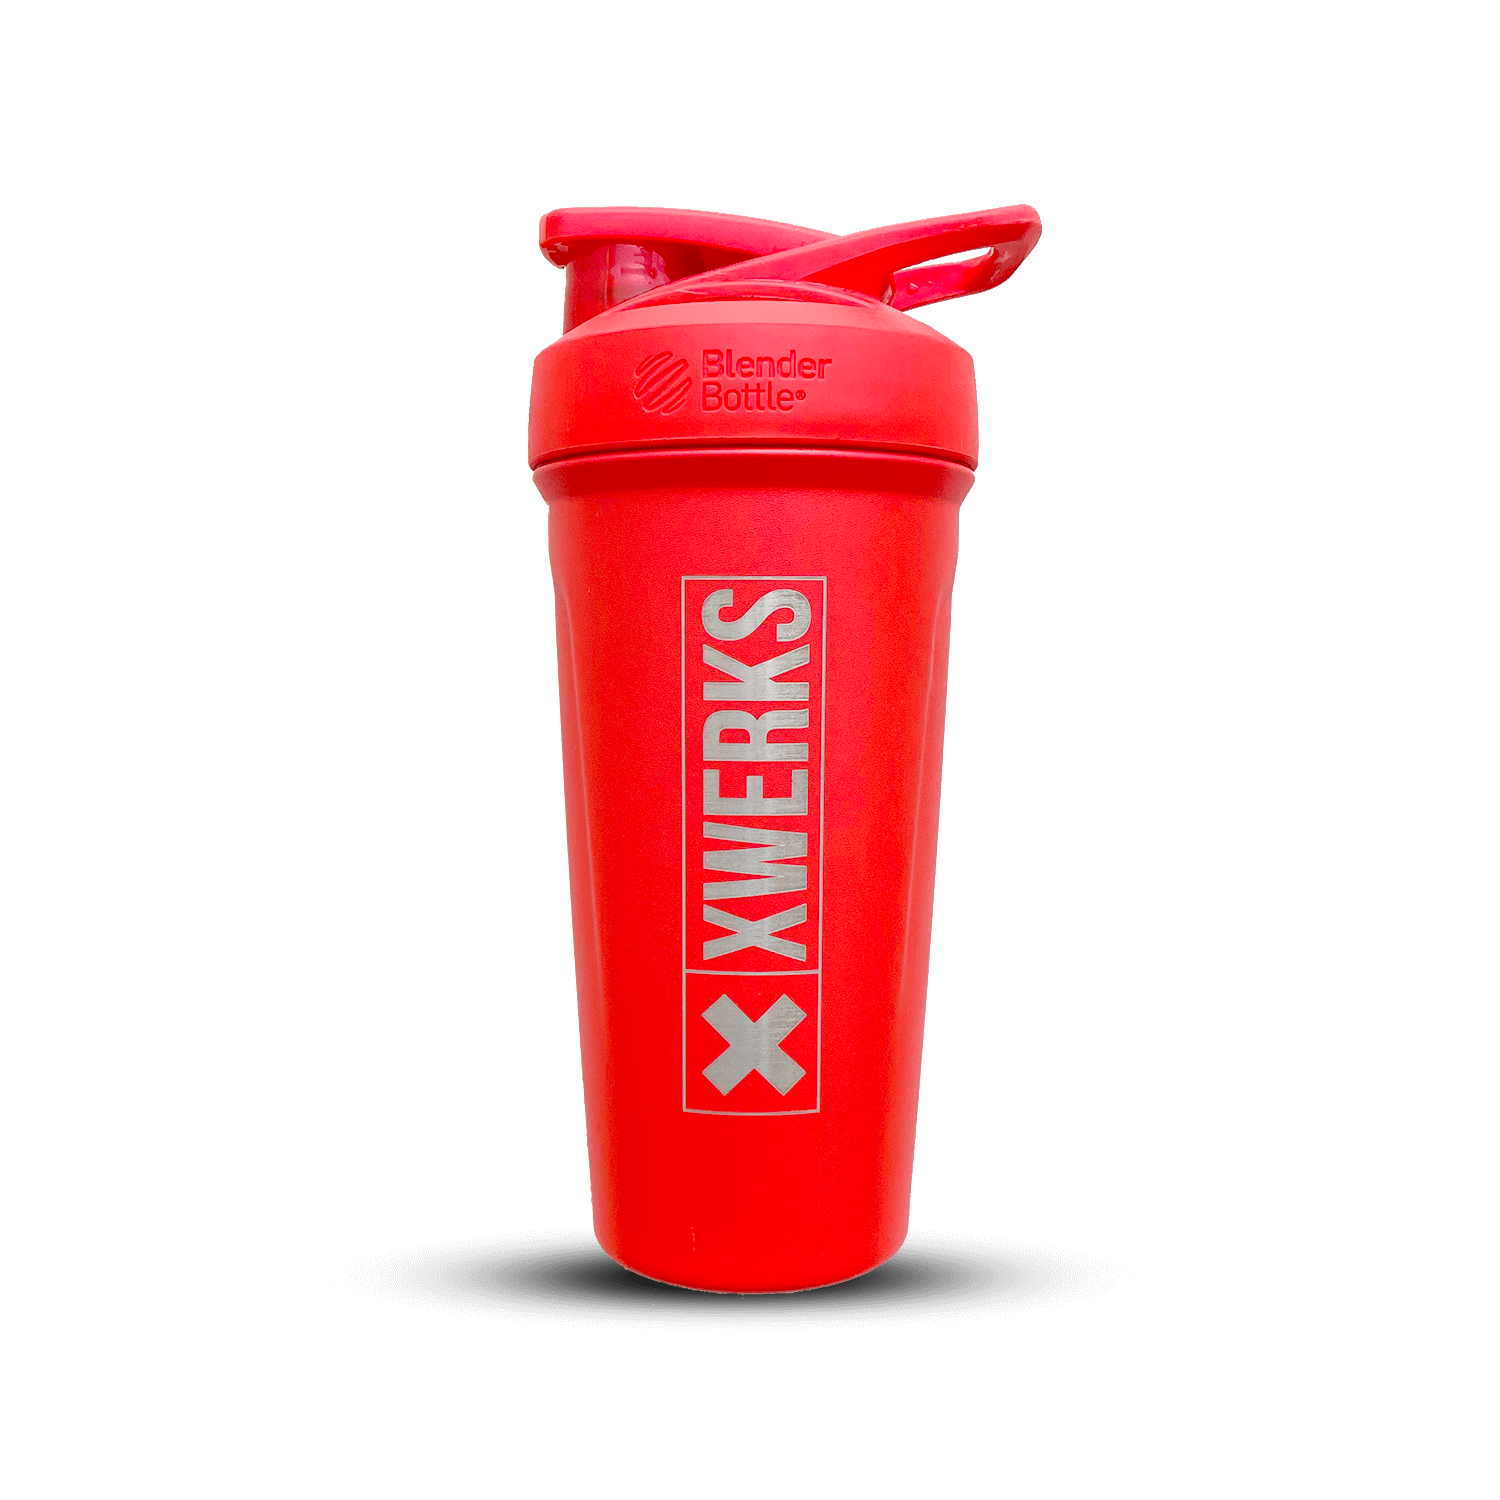 500ml Red Shaker Bottle Double Wall Sports Style Metal Protein